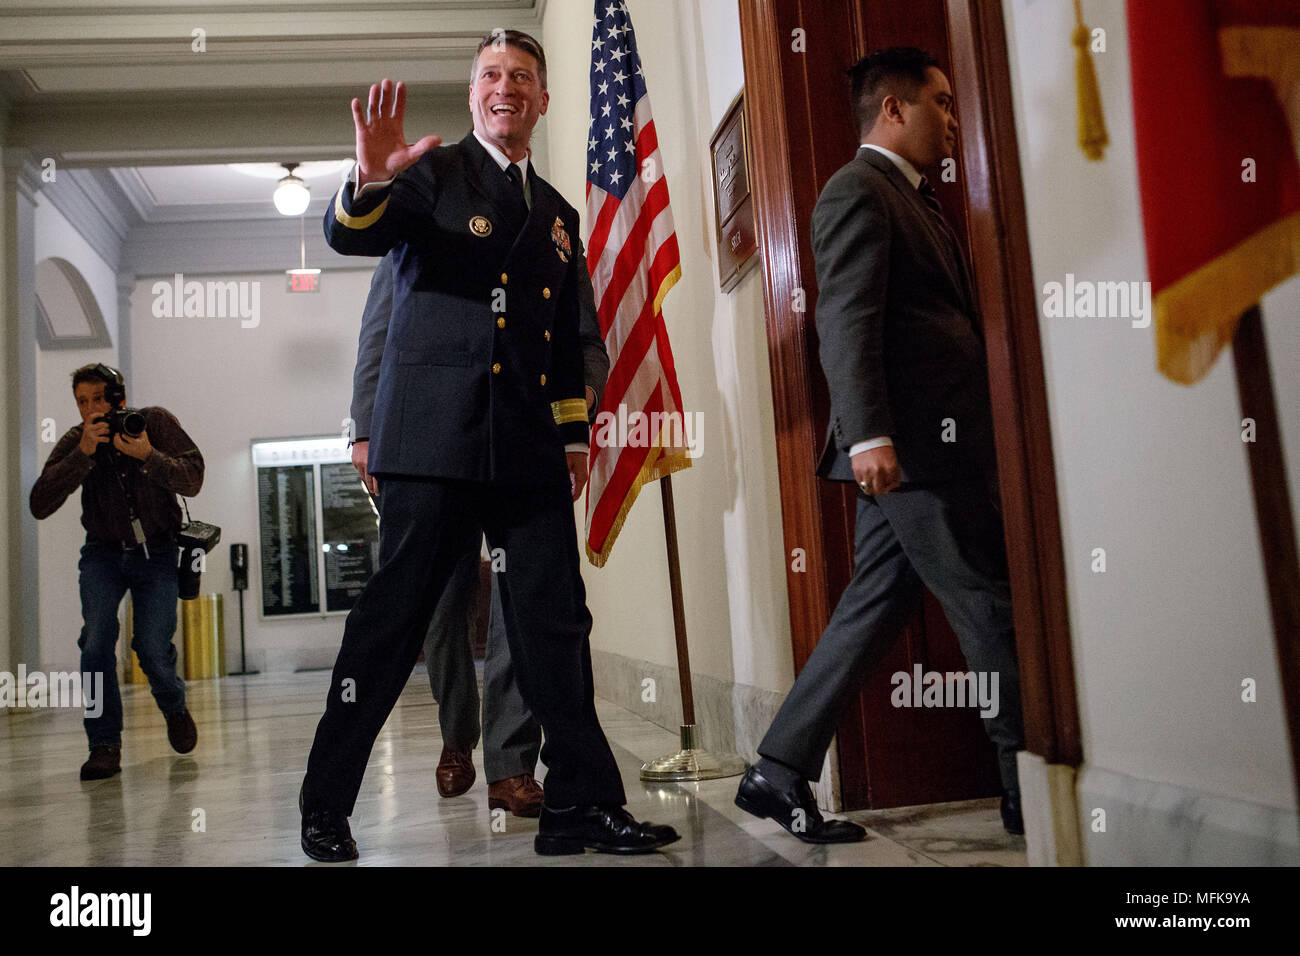 Washington, USA. 16th Apr, 2018. Veterans Affairs Secretary nominee Ronny Jackson (L, front) is seen on Capitol Hill in Washington, DC, the United States, on April 16, 2018. White House physician Ronny Jackson announced on April 26 that he had withdrawn from President Donald Trump's nomination to be the next Veterans Affairs Secretary, in the wake of a series of allegations that he had fostered a hostile work environment and behaved improperly while serving as the top doctor in the White House. Credit: Ting Shen/Xinhua/Alamy Live News Stock Photo